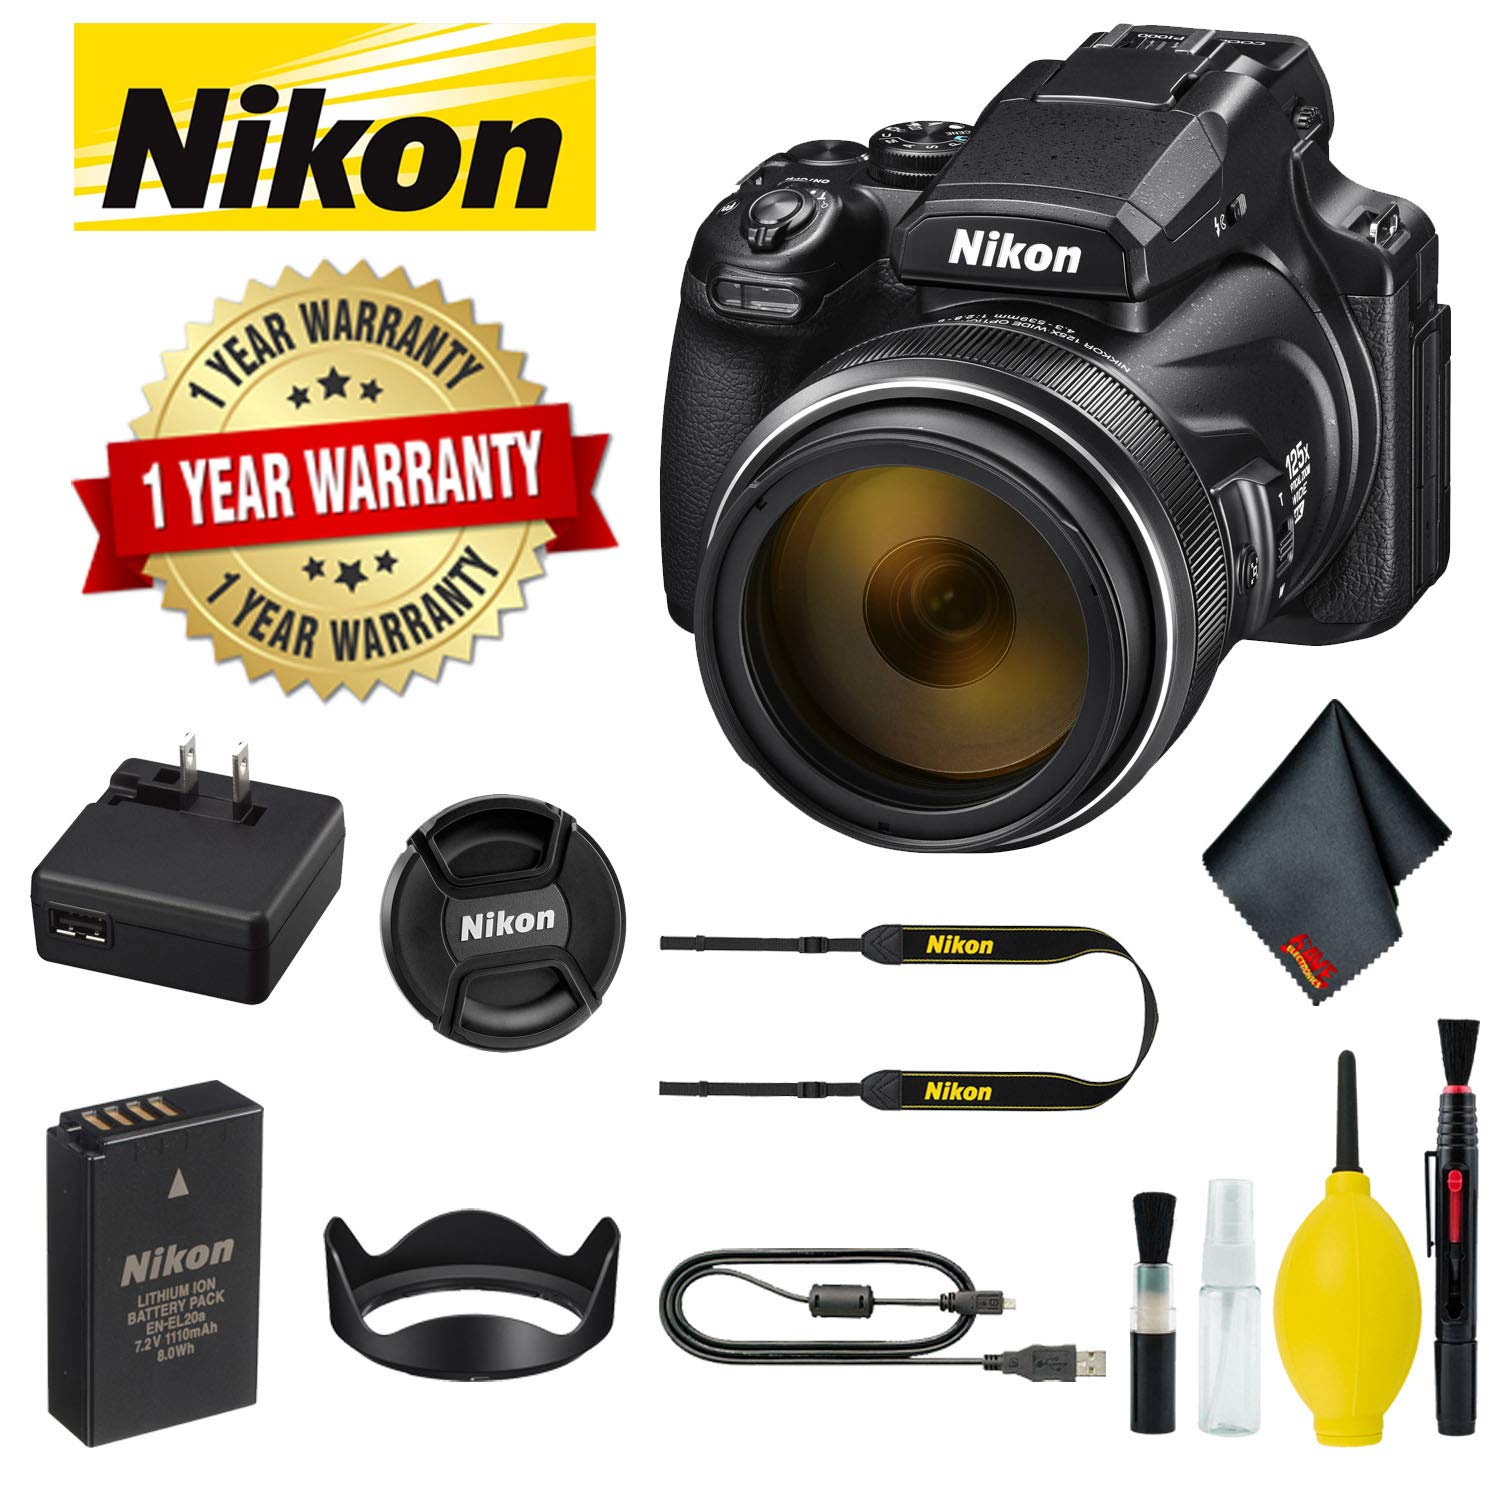 Nikon COOLPIX P1000 Digital Camera with 1 Year Extended Warranty and Cleaning Kit